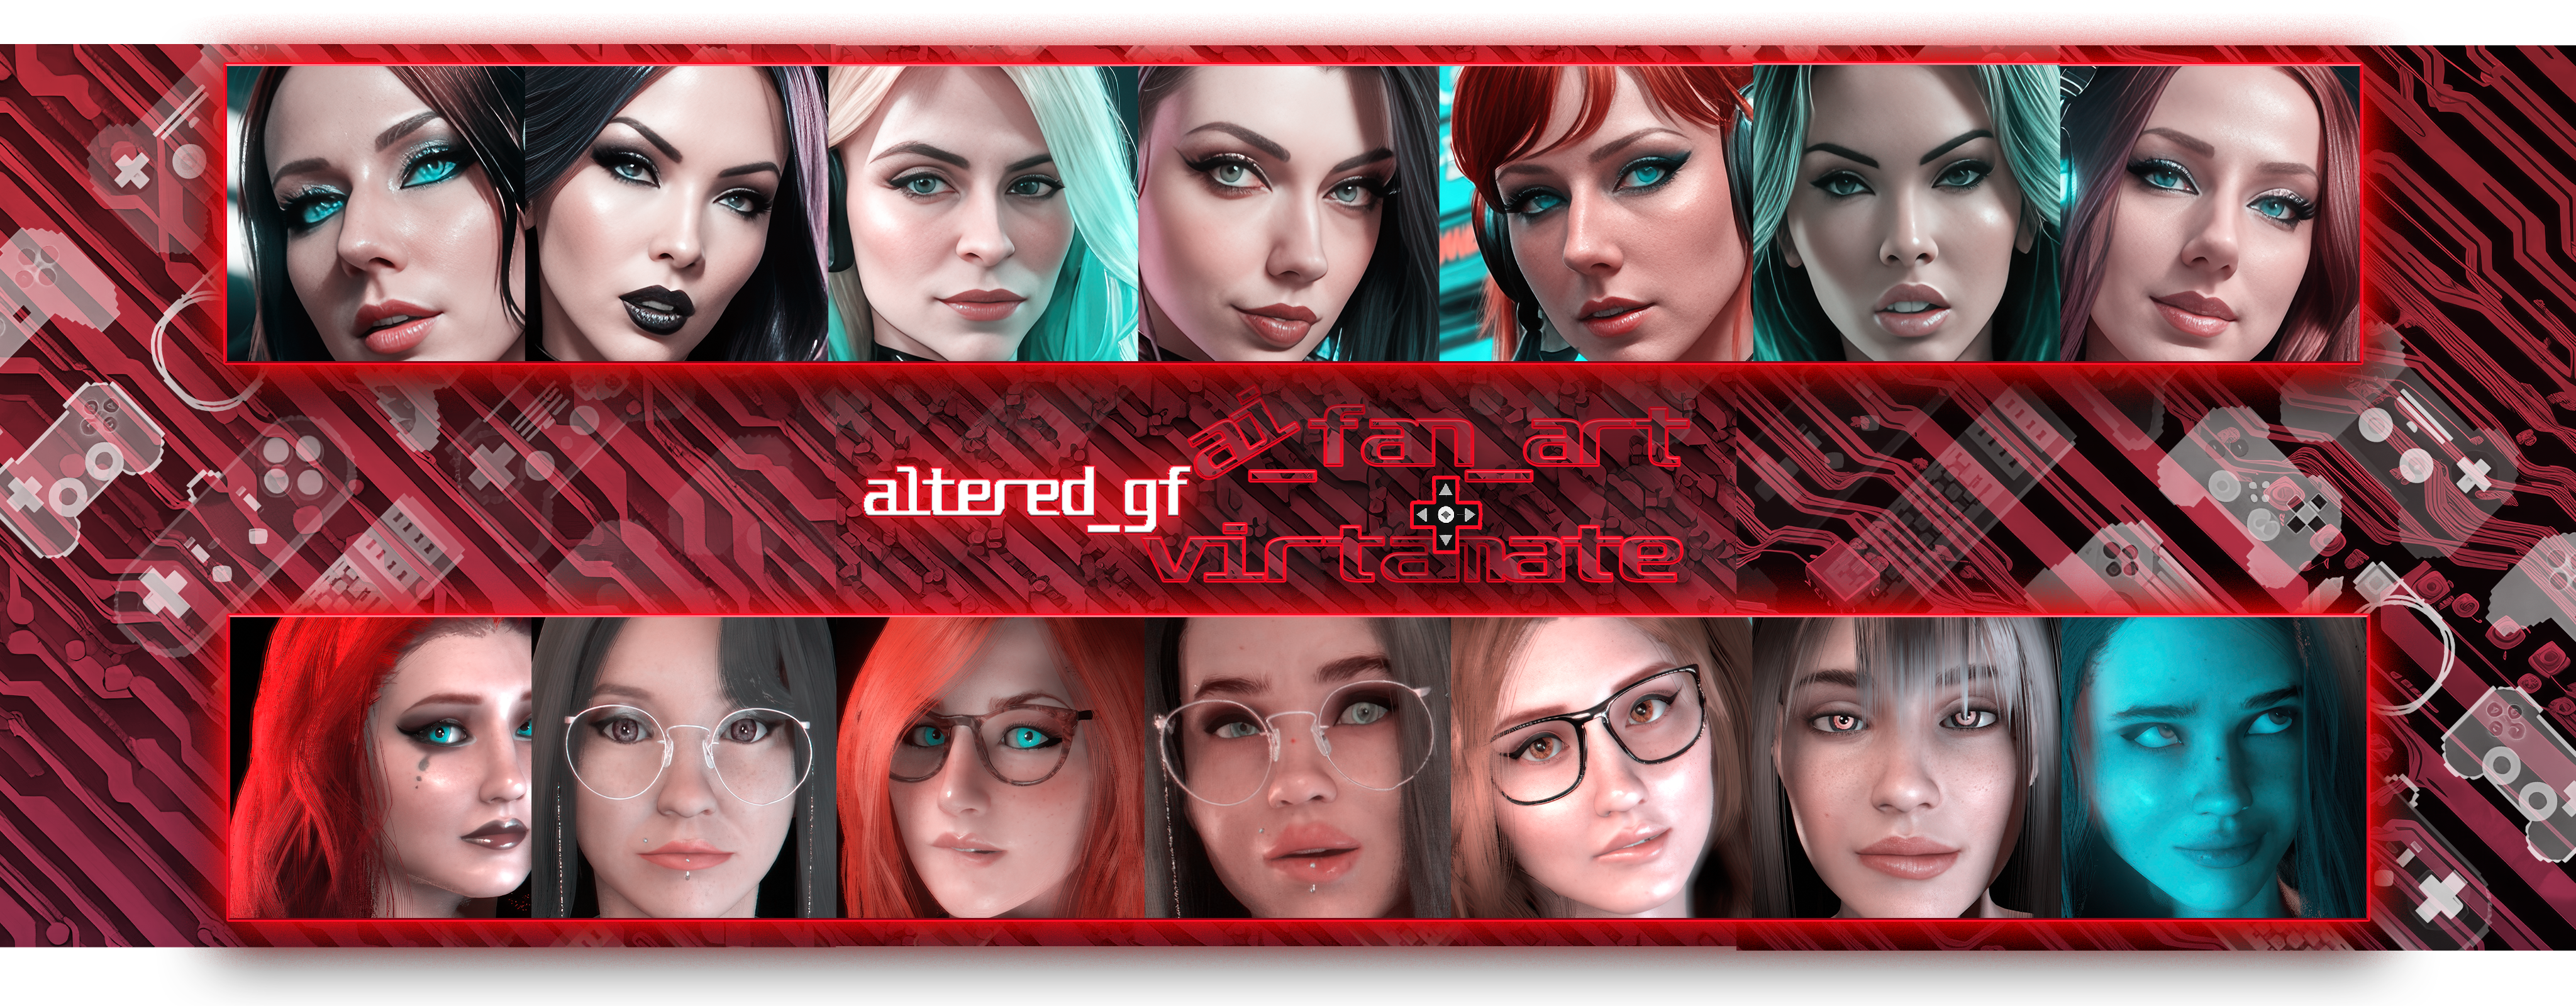 a_gf Gamer Girl Selection Faces Banner3.png